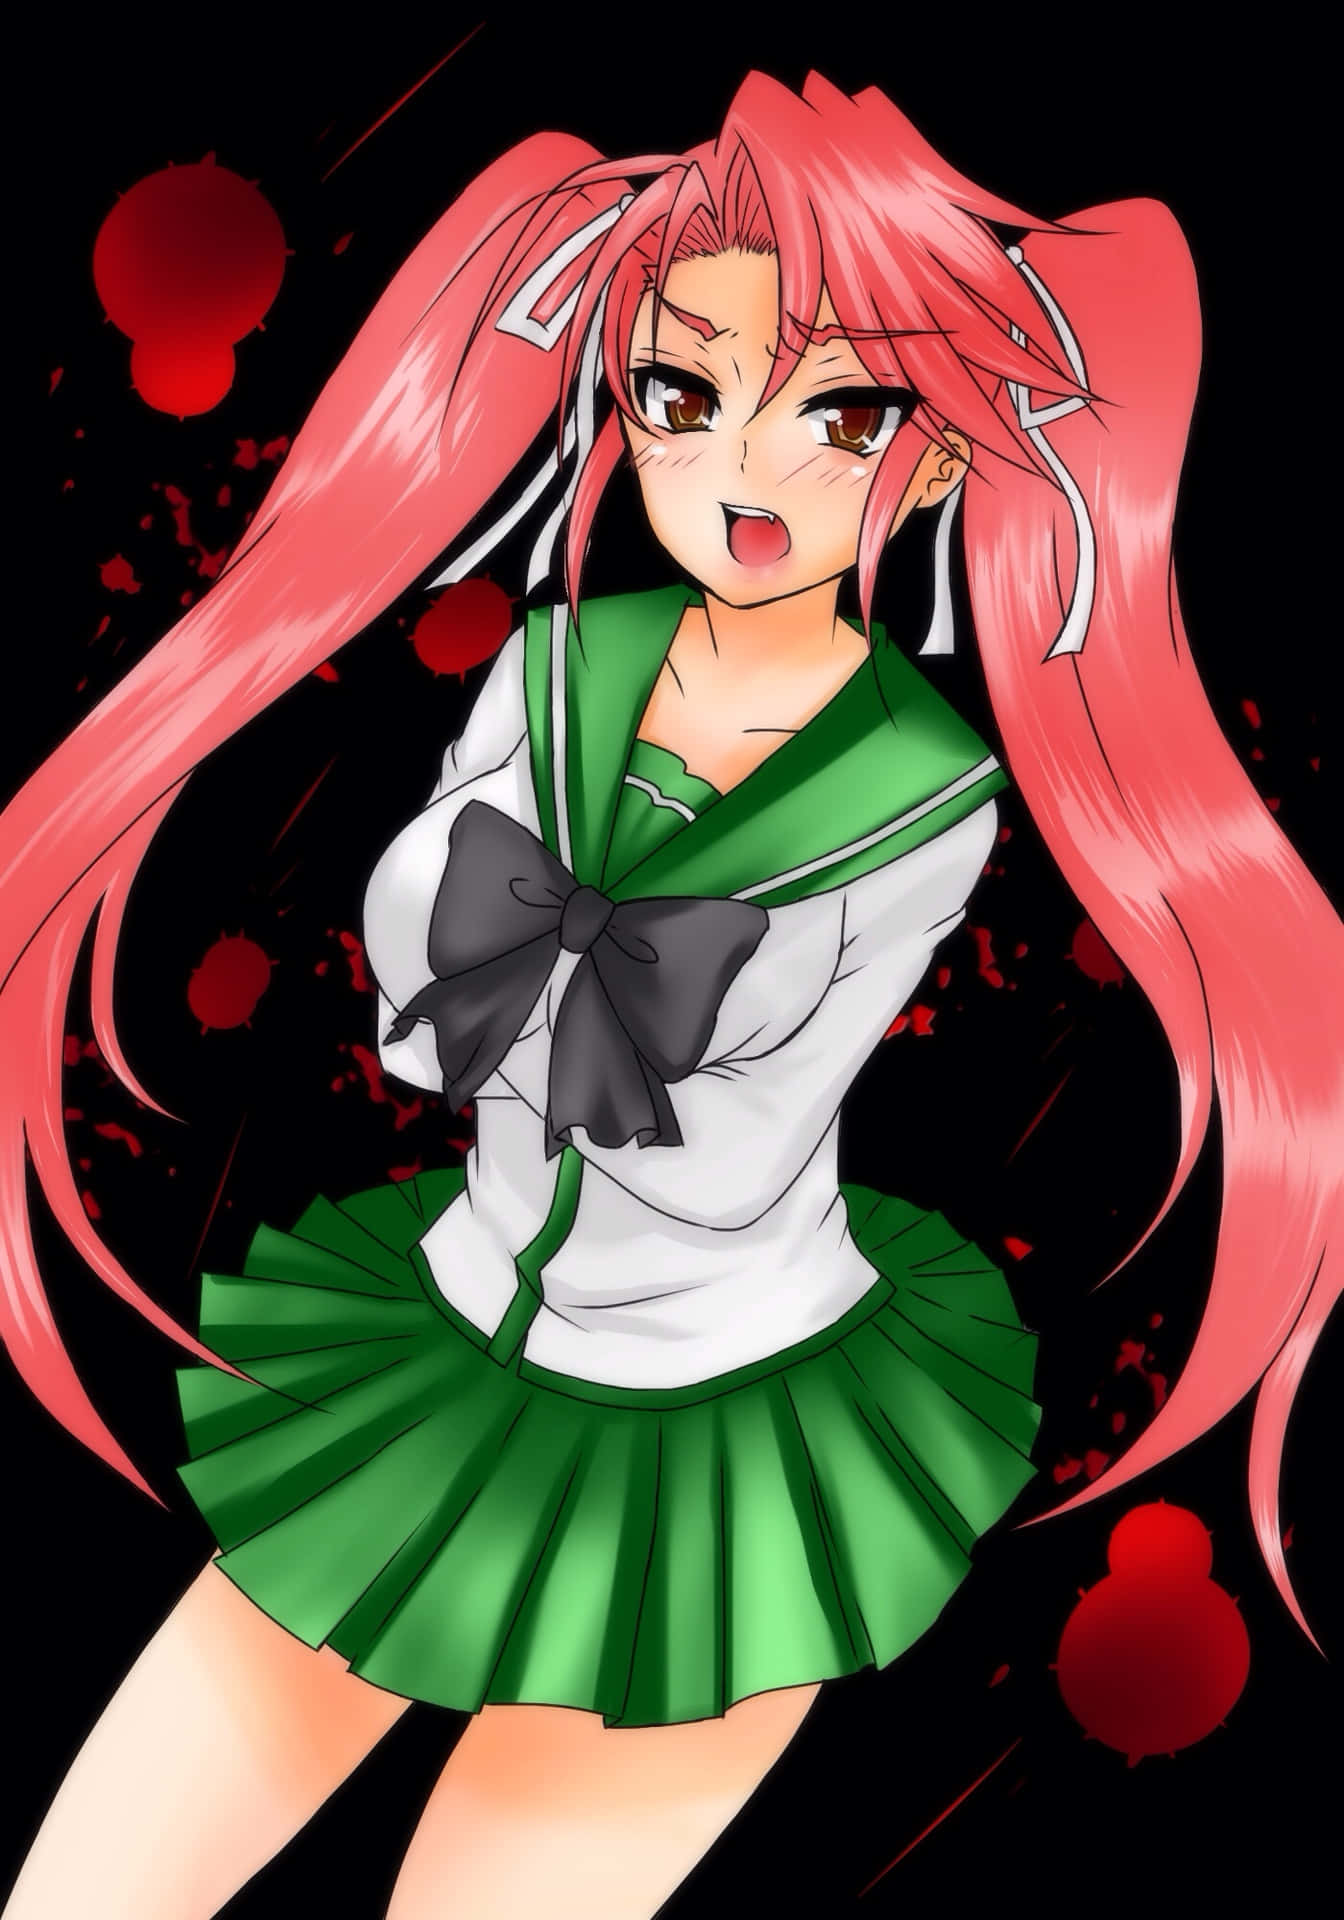 Saya Takagi, A Determined Character From Highschool Of The Dead, Holding Her Weapon And Looking Ahead Fearlessly. Wallpaper